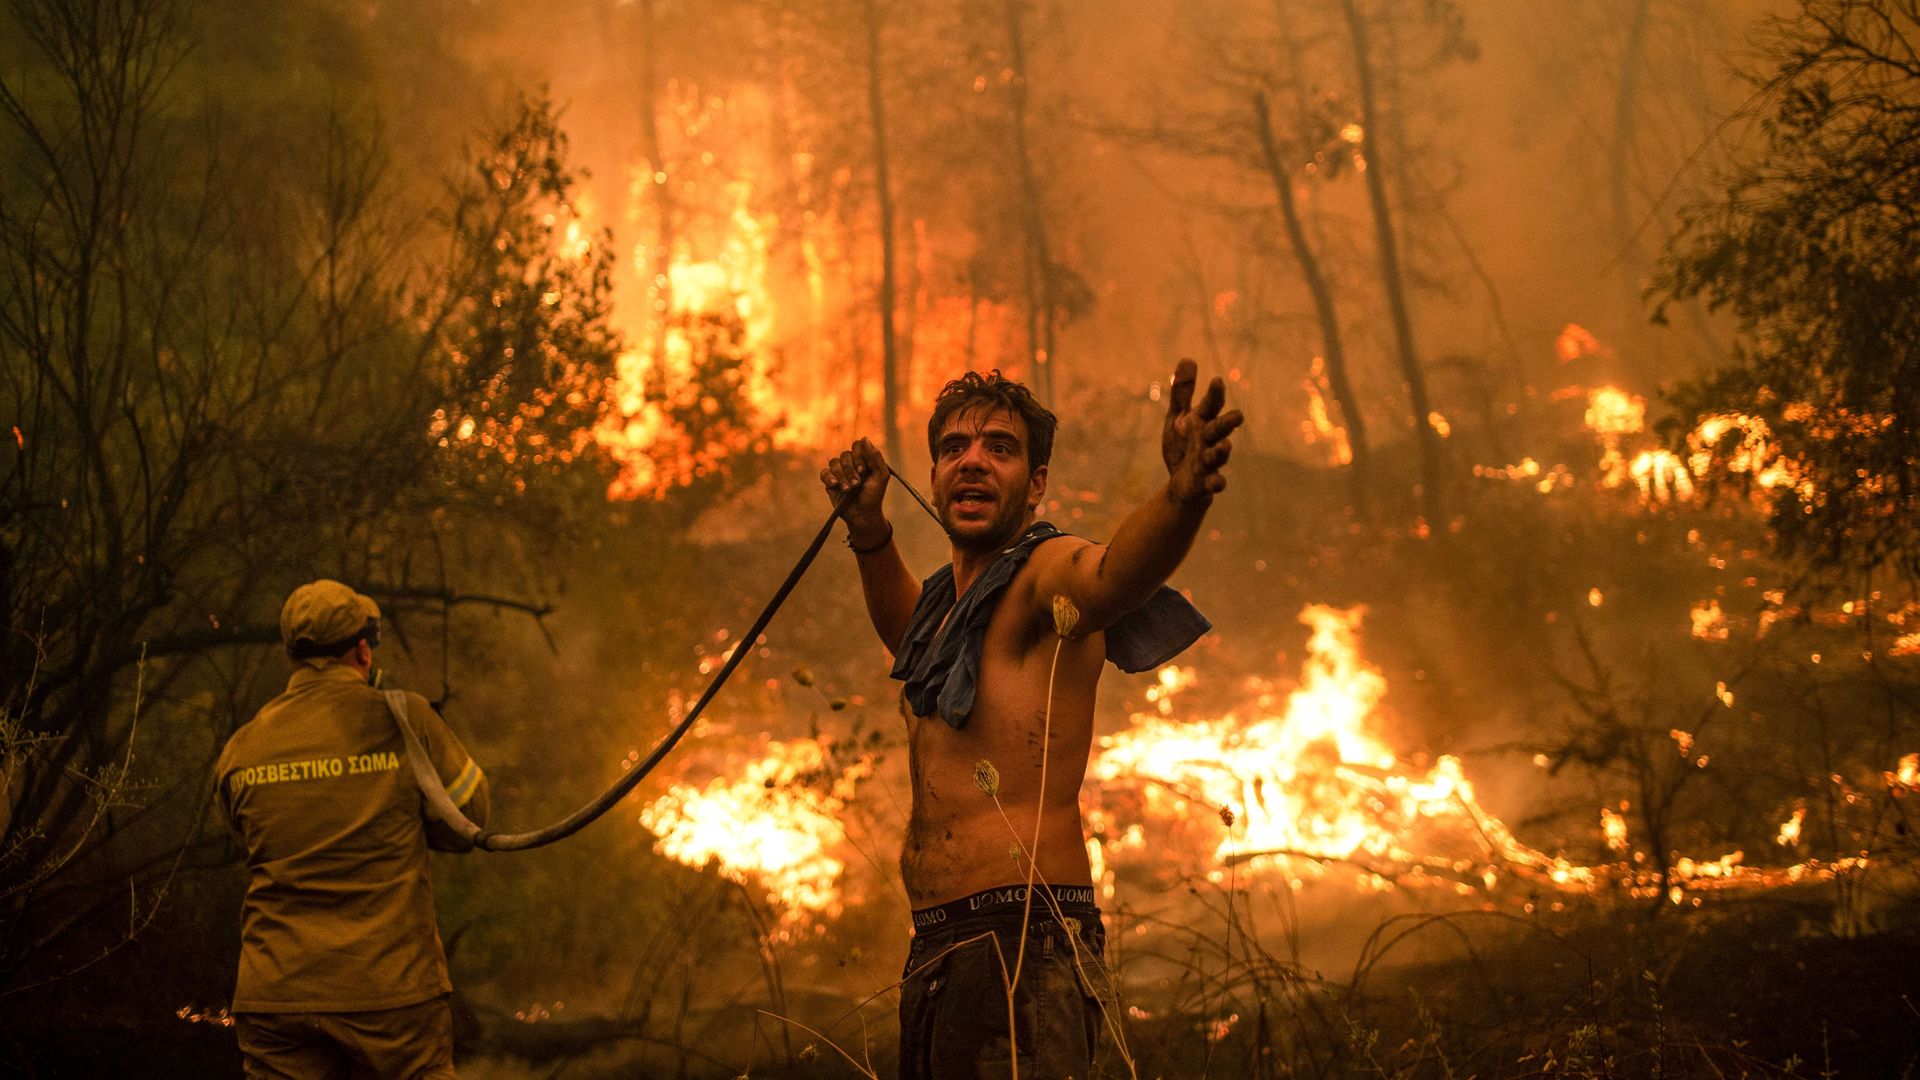 A local resident gestures as he holds an empty water hose during an attempt to extinguish forest fires approaching the village of Pefki on Evia (Euboea) island in Greece.